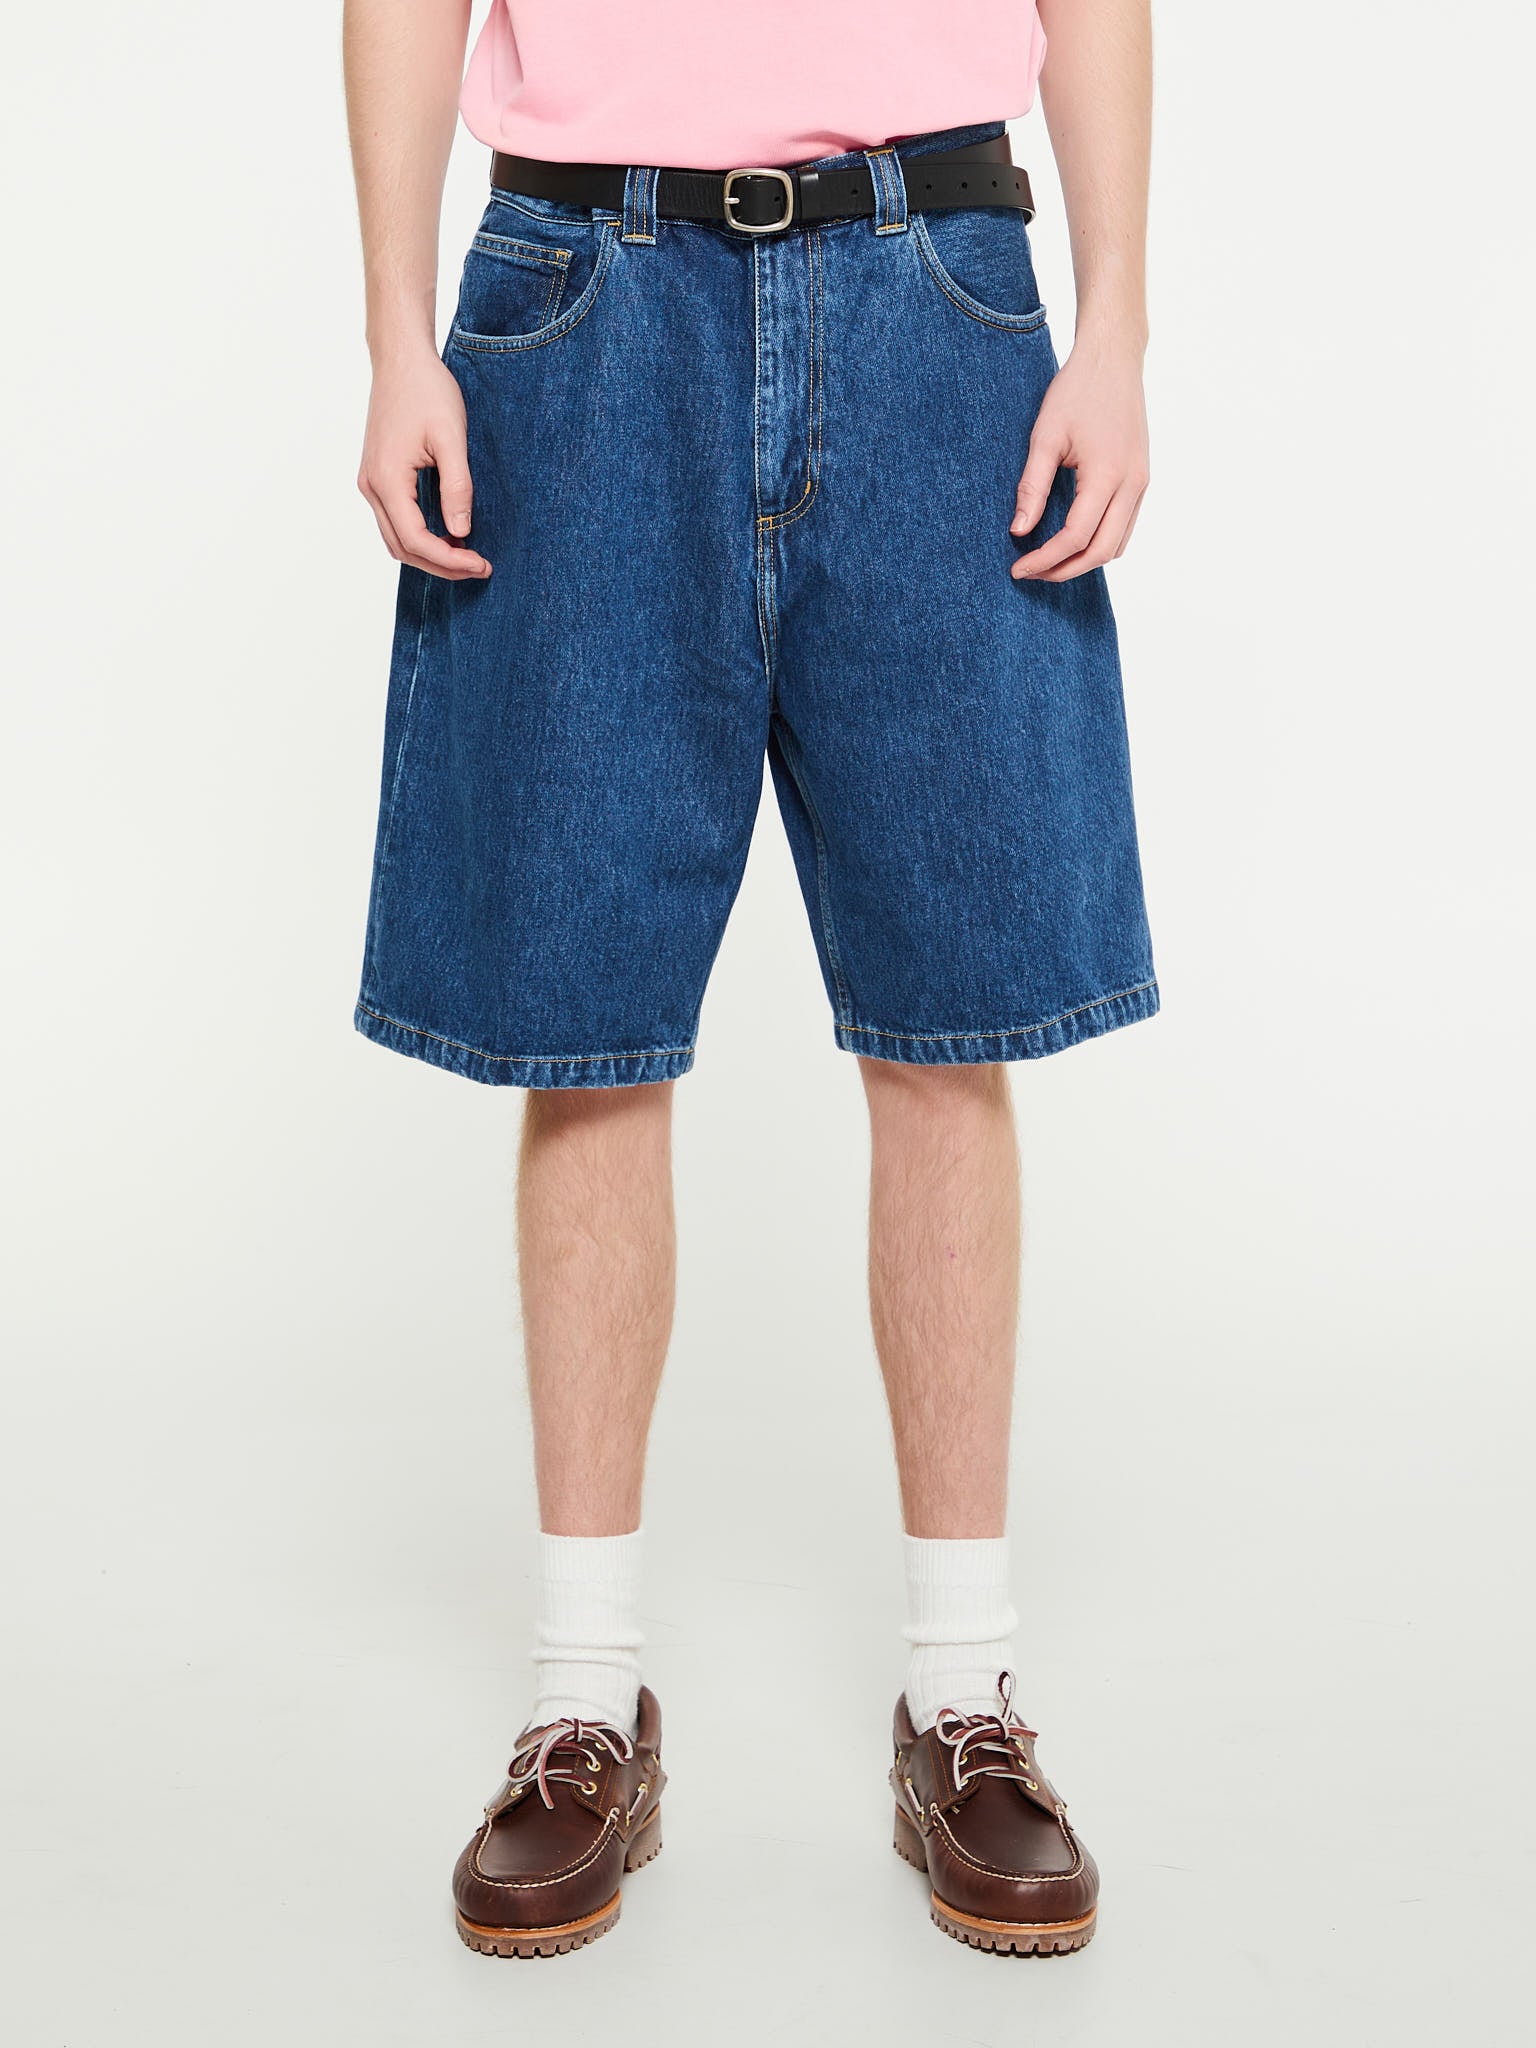 Carhartt WIP - Brandon Shorts in Blue Stone Washed